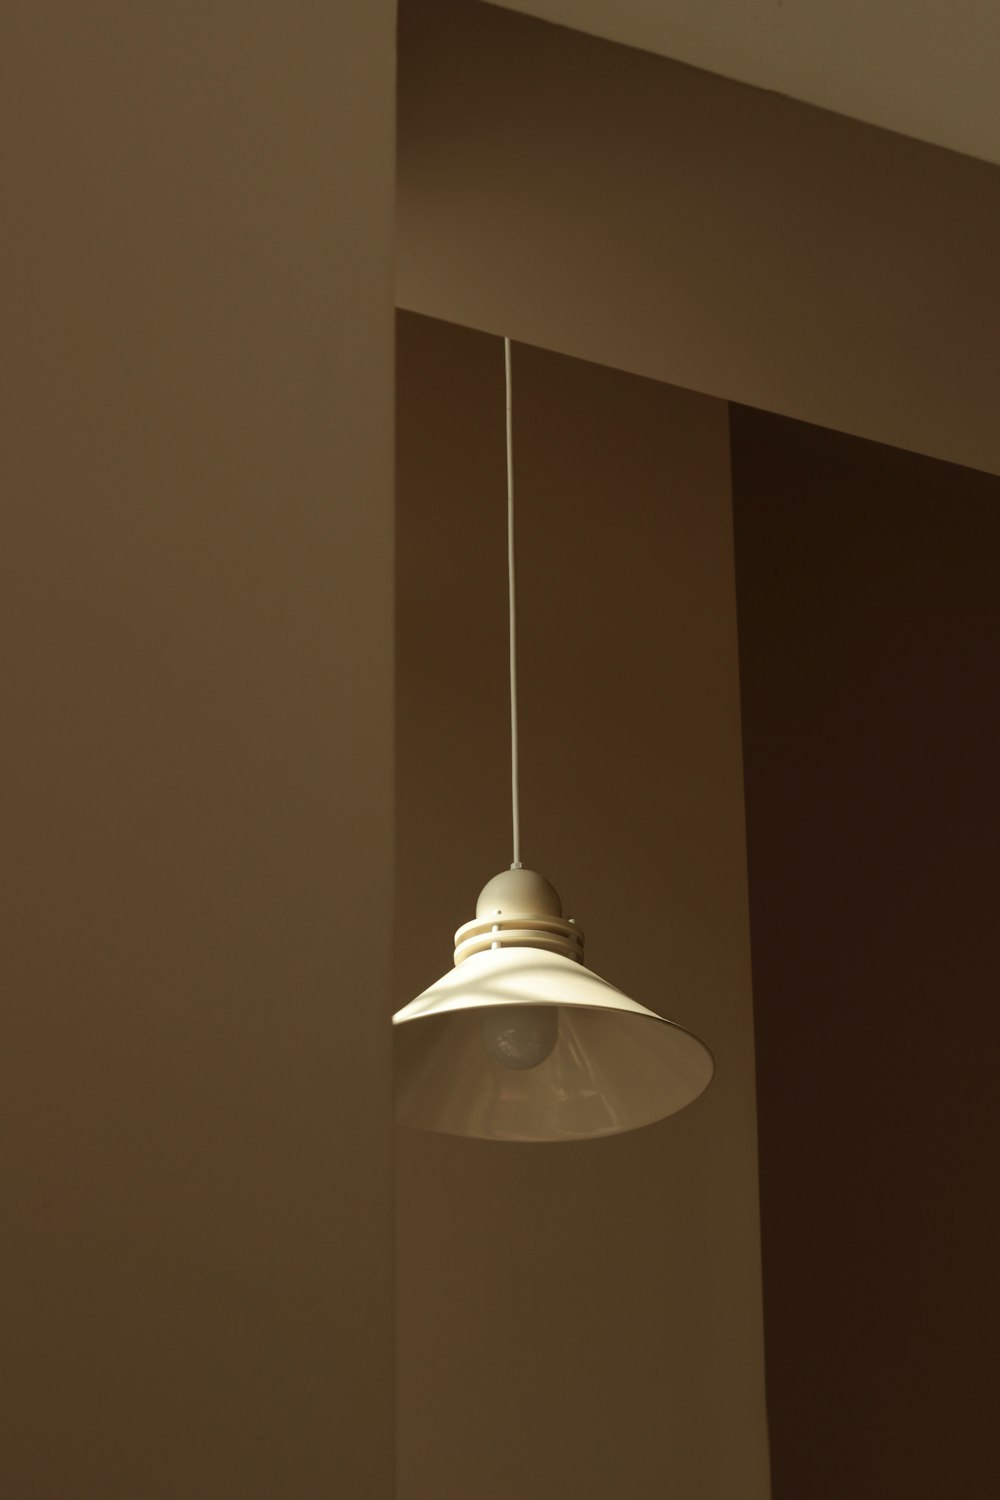 a light fixture from a ceiling